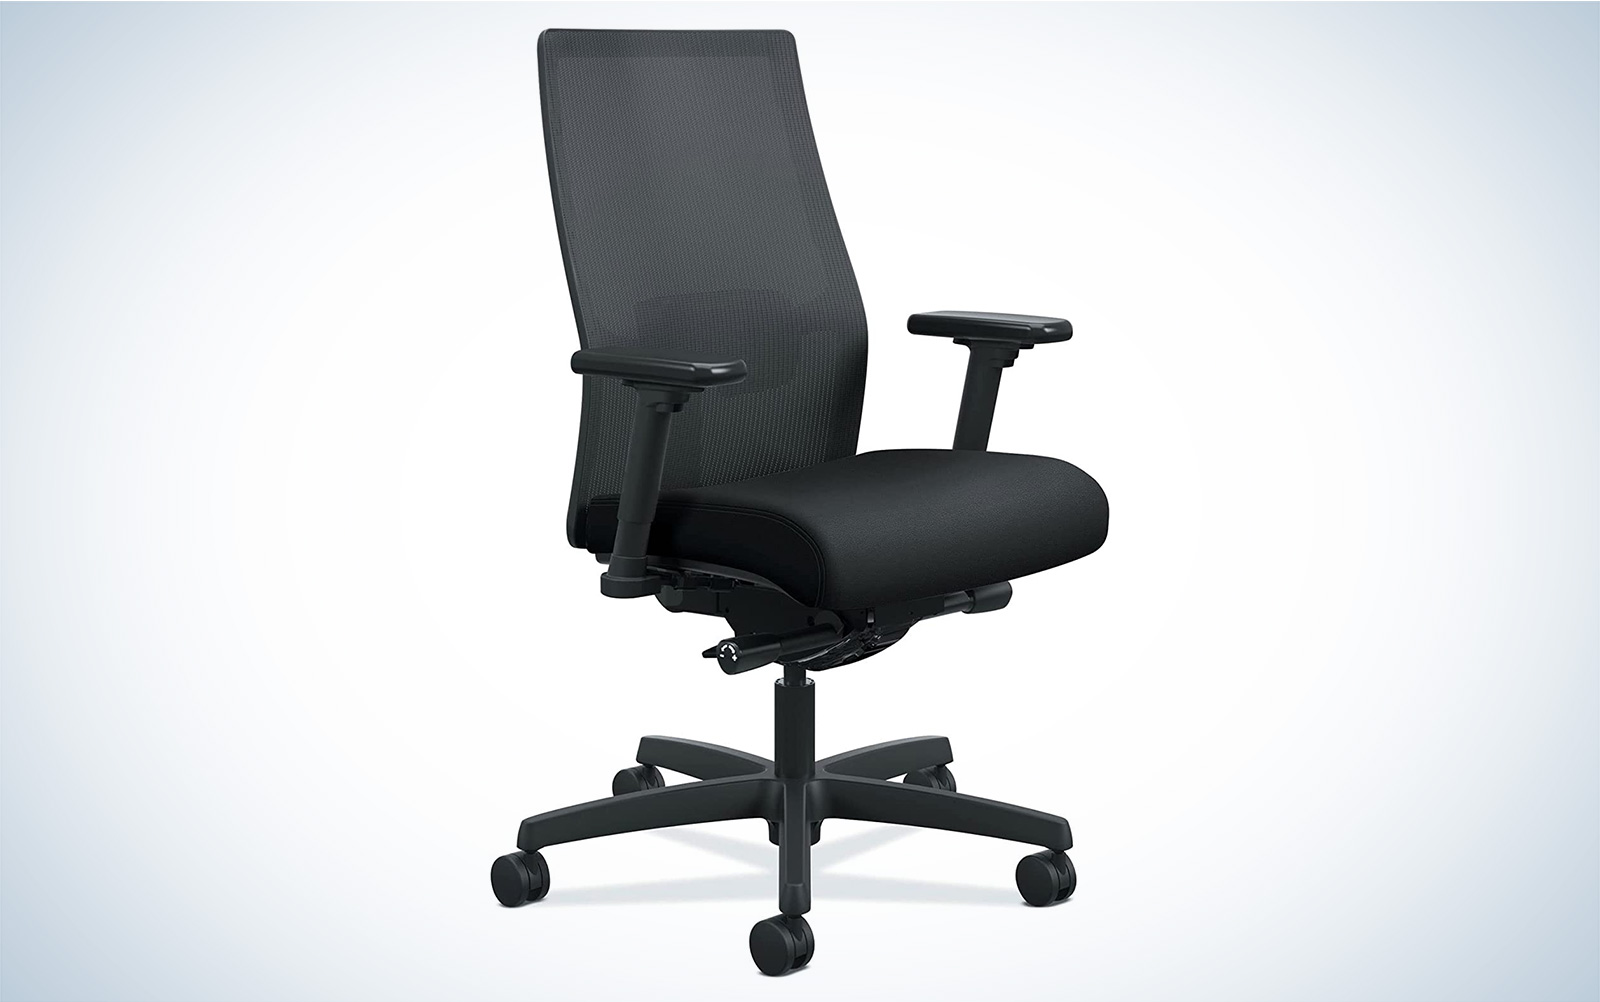 the Hon office chair for lumbar support in black